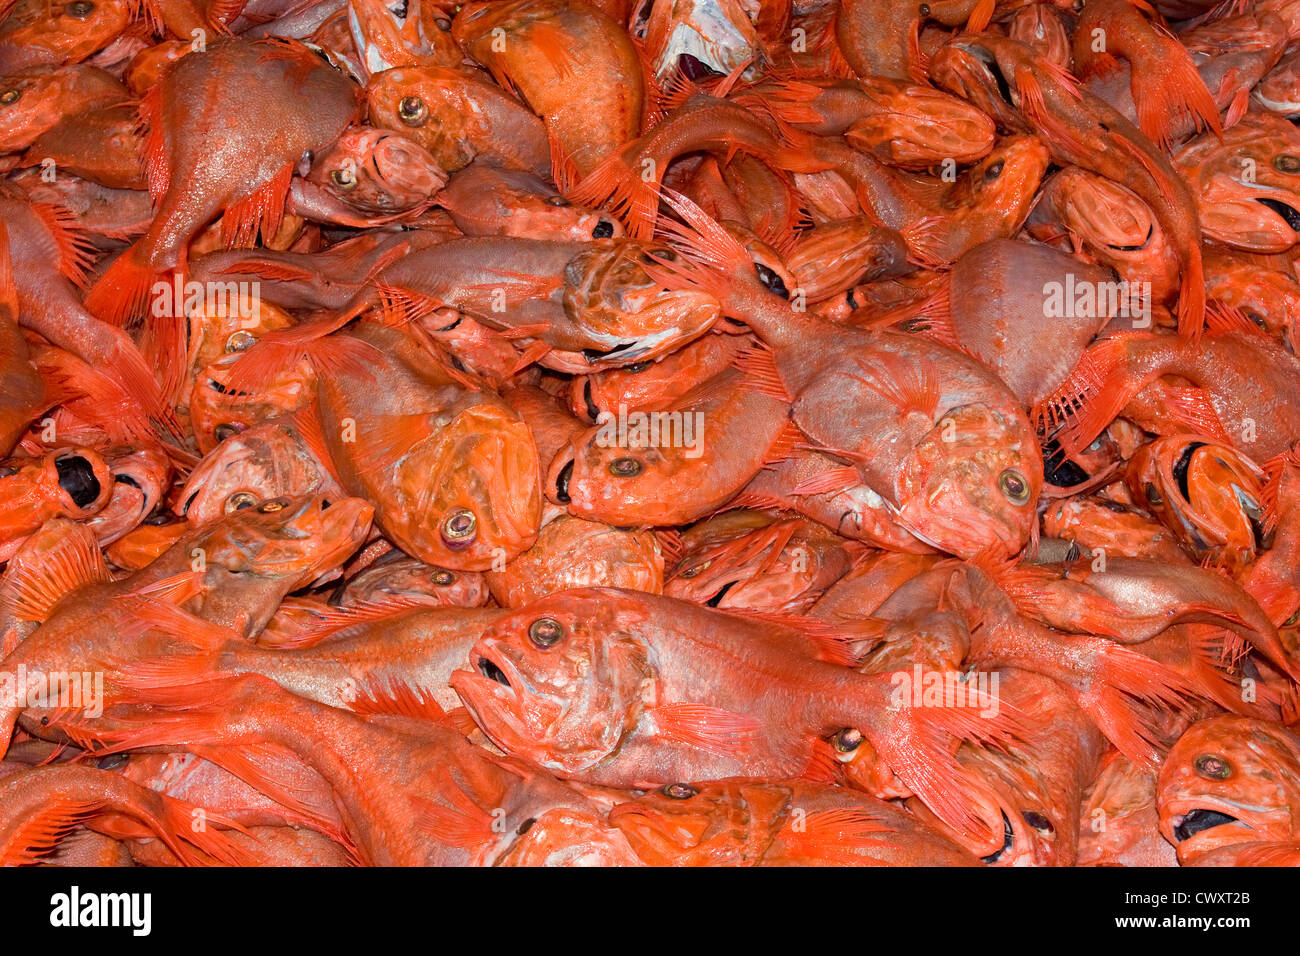 Orange Roughy (Hoplostethus Atlanticus): haul from trawl net on a commercial, deep-sea fishing trawler. Stock Photo